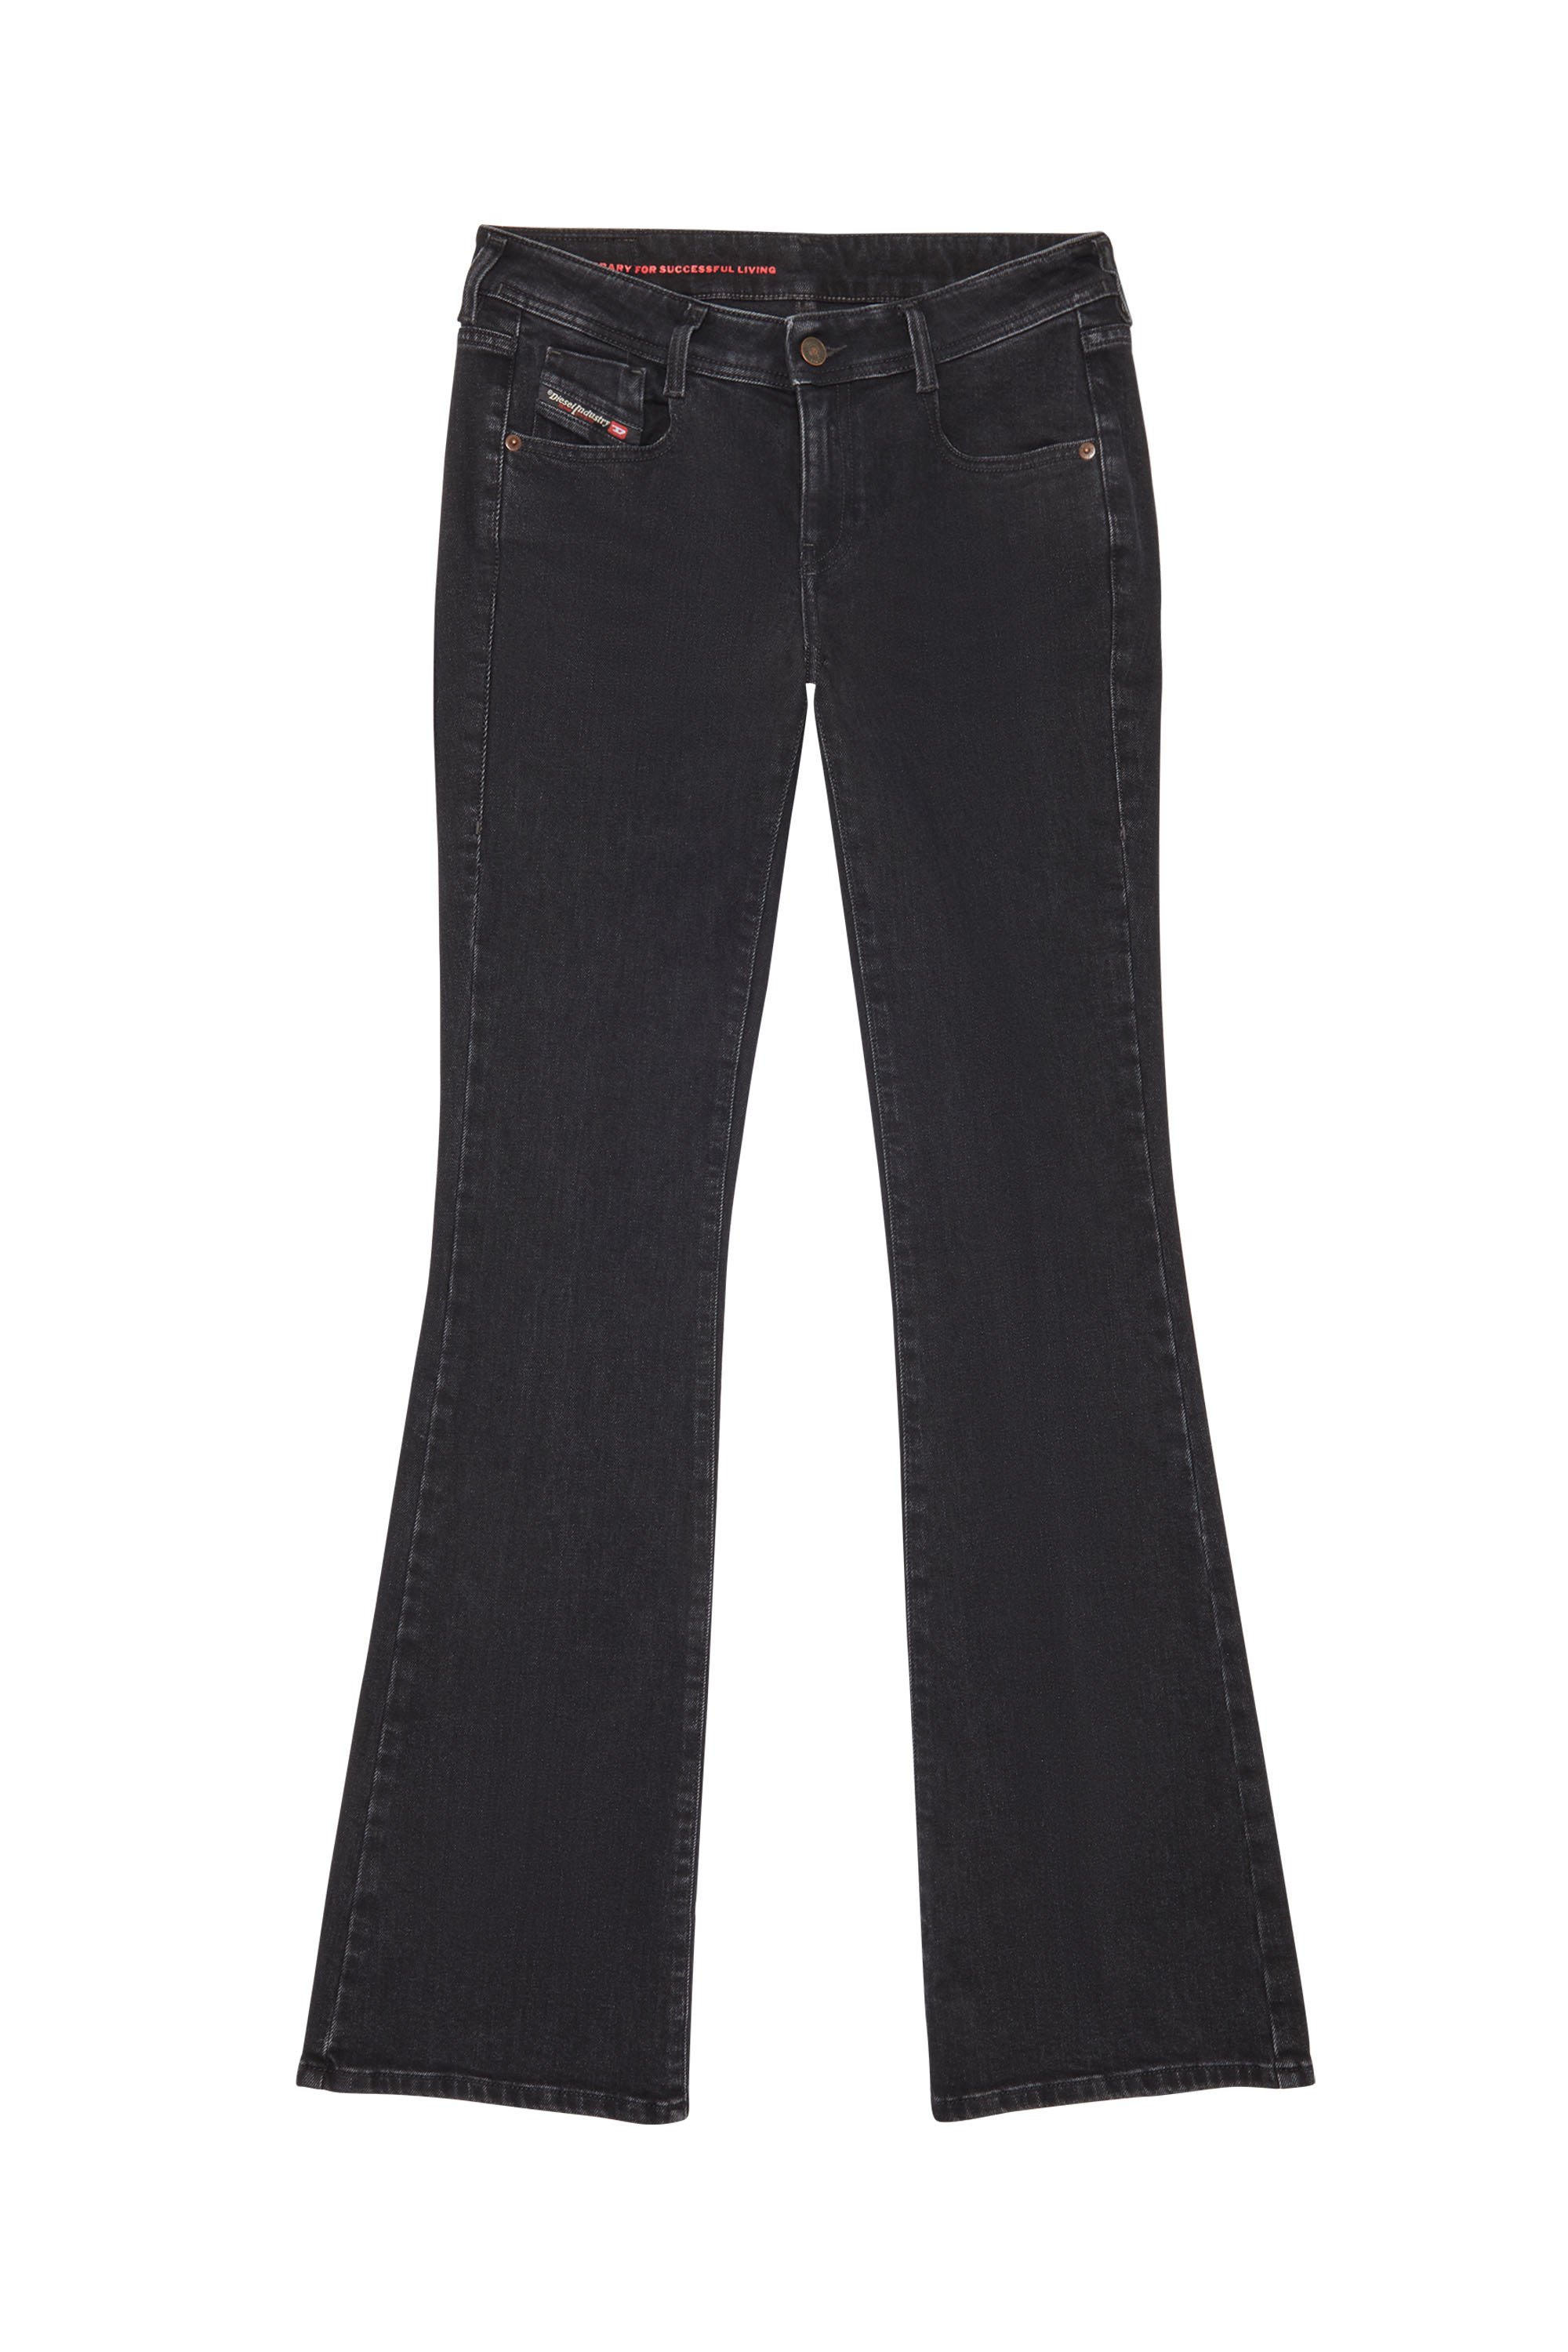 1969 D-EBBEY Z9C25 Bootcut and Flare Jeans, Negro/Gris oscuro - Vaqueros